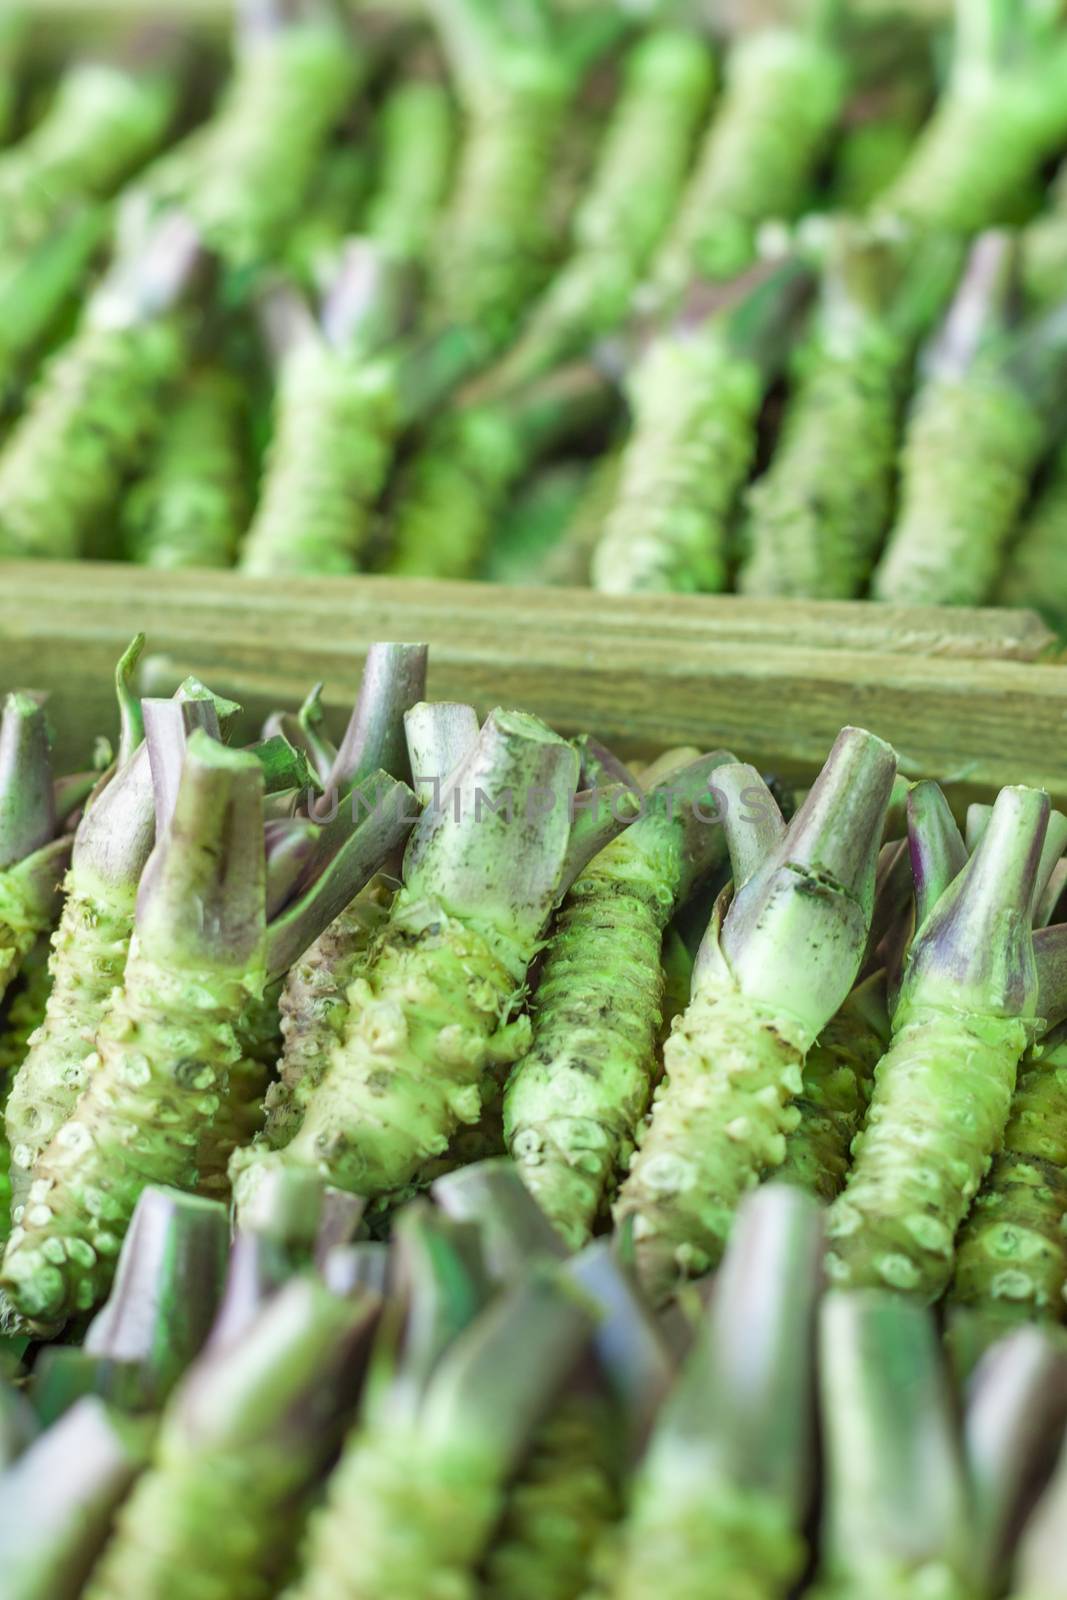 Wasabi root for sale in a typical japanese market by mariusz_prusaczyk